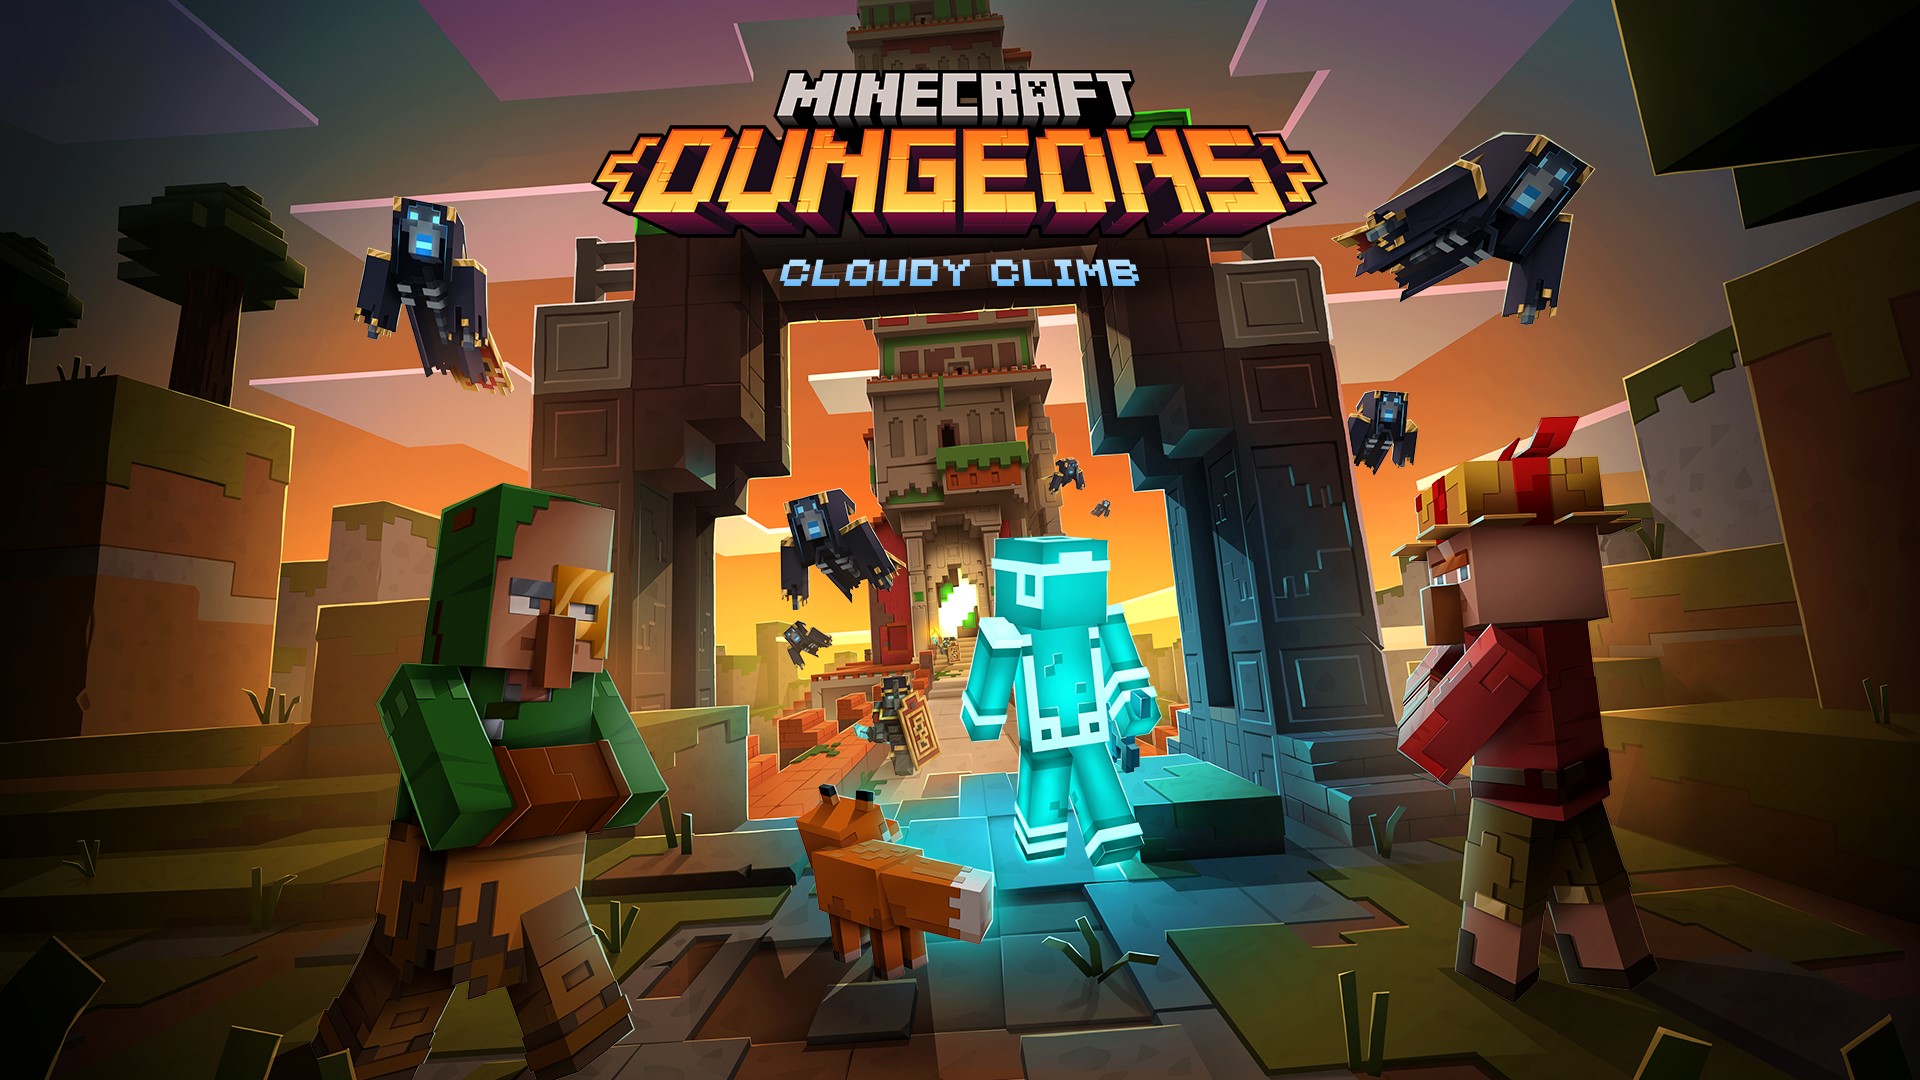 Minecraft Dungeons First Seasonal Adventure is Here with the Free Cloudy Climb Update